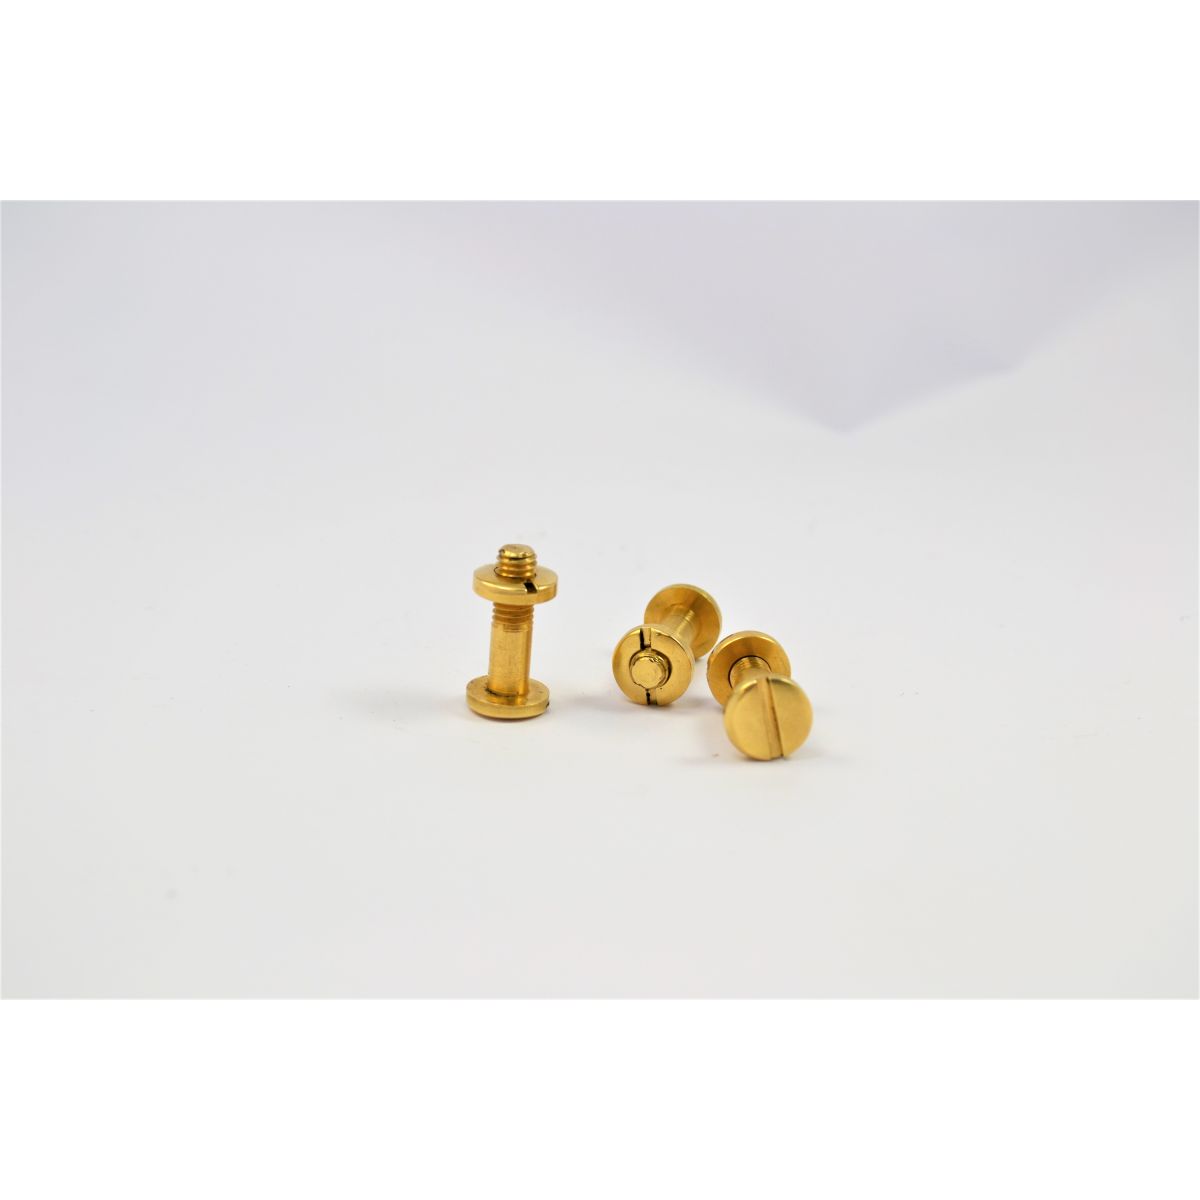 Pigeat Taillanderie Set of fixing screw and nut for reparing